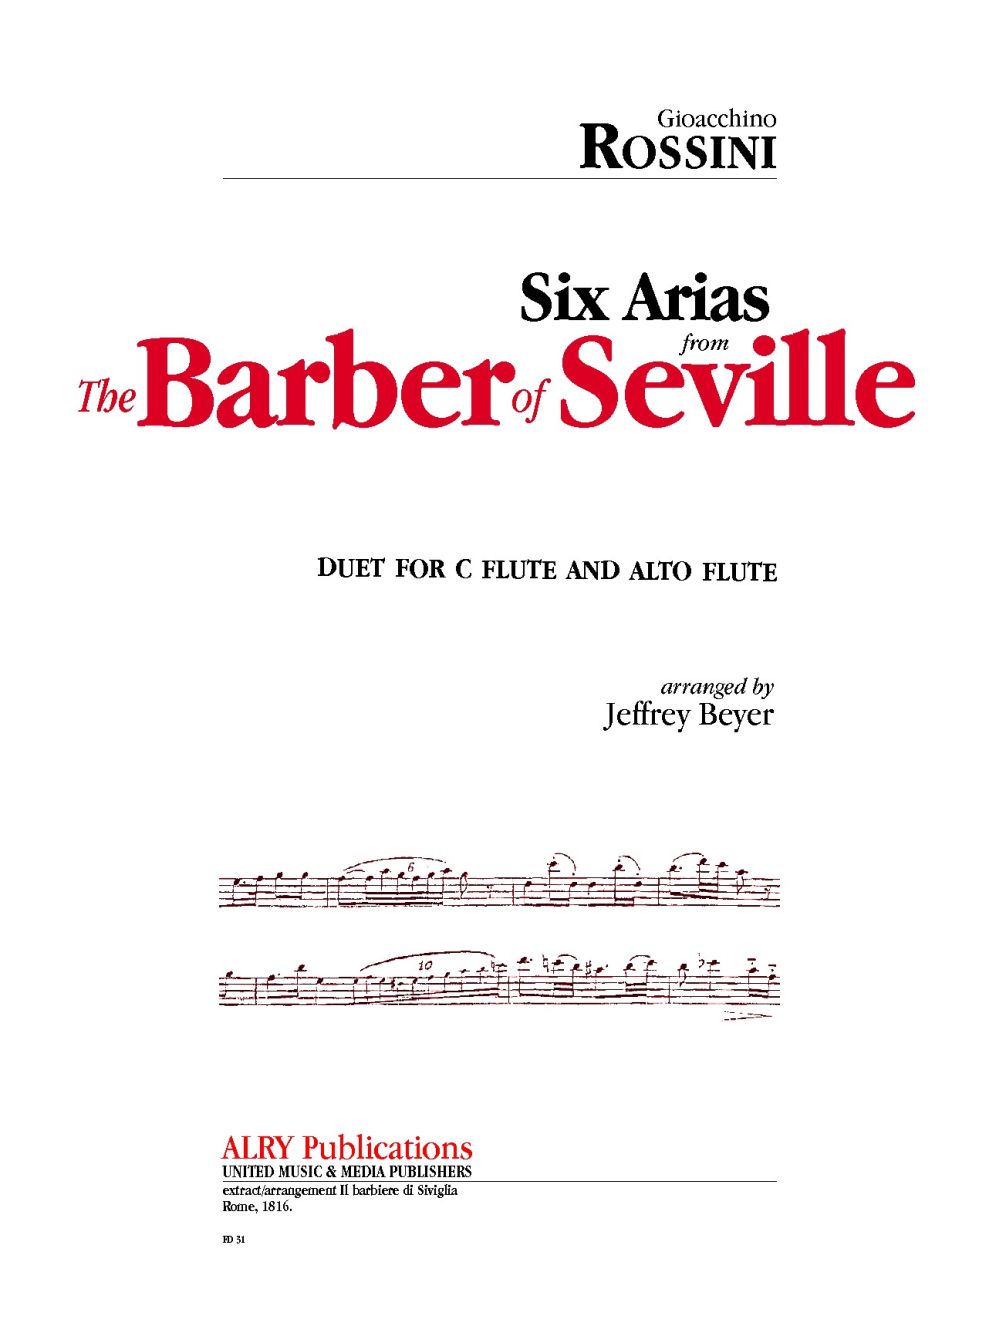 6 Arias From The Barber Of Seville (ROSSINI GIOACCHINO)